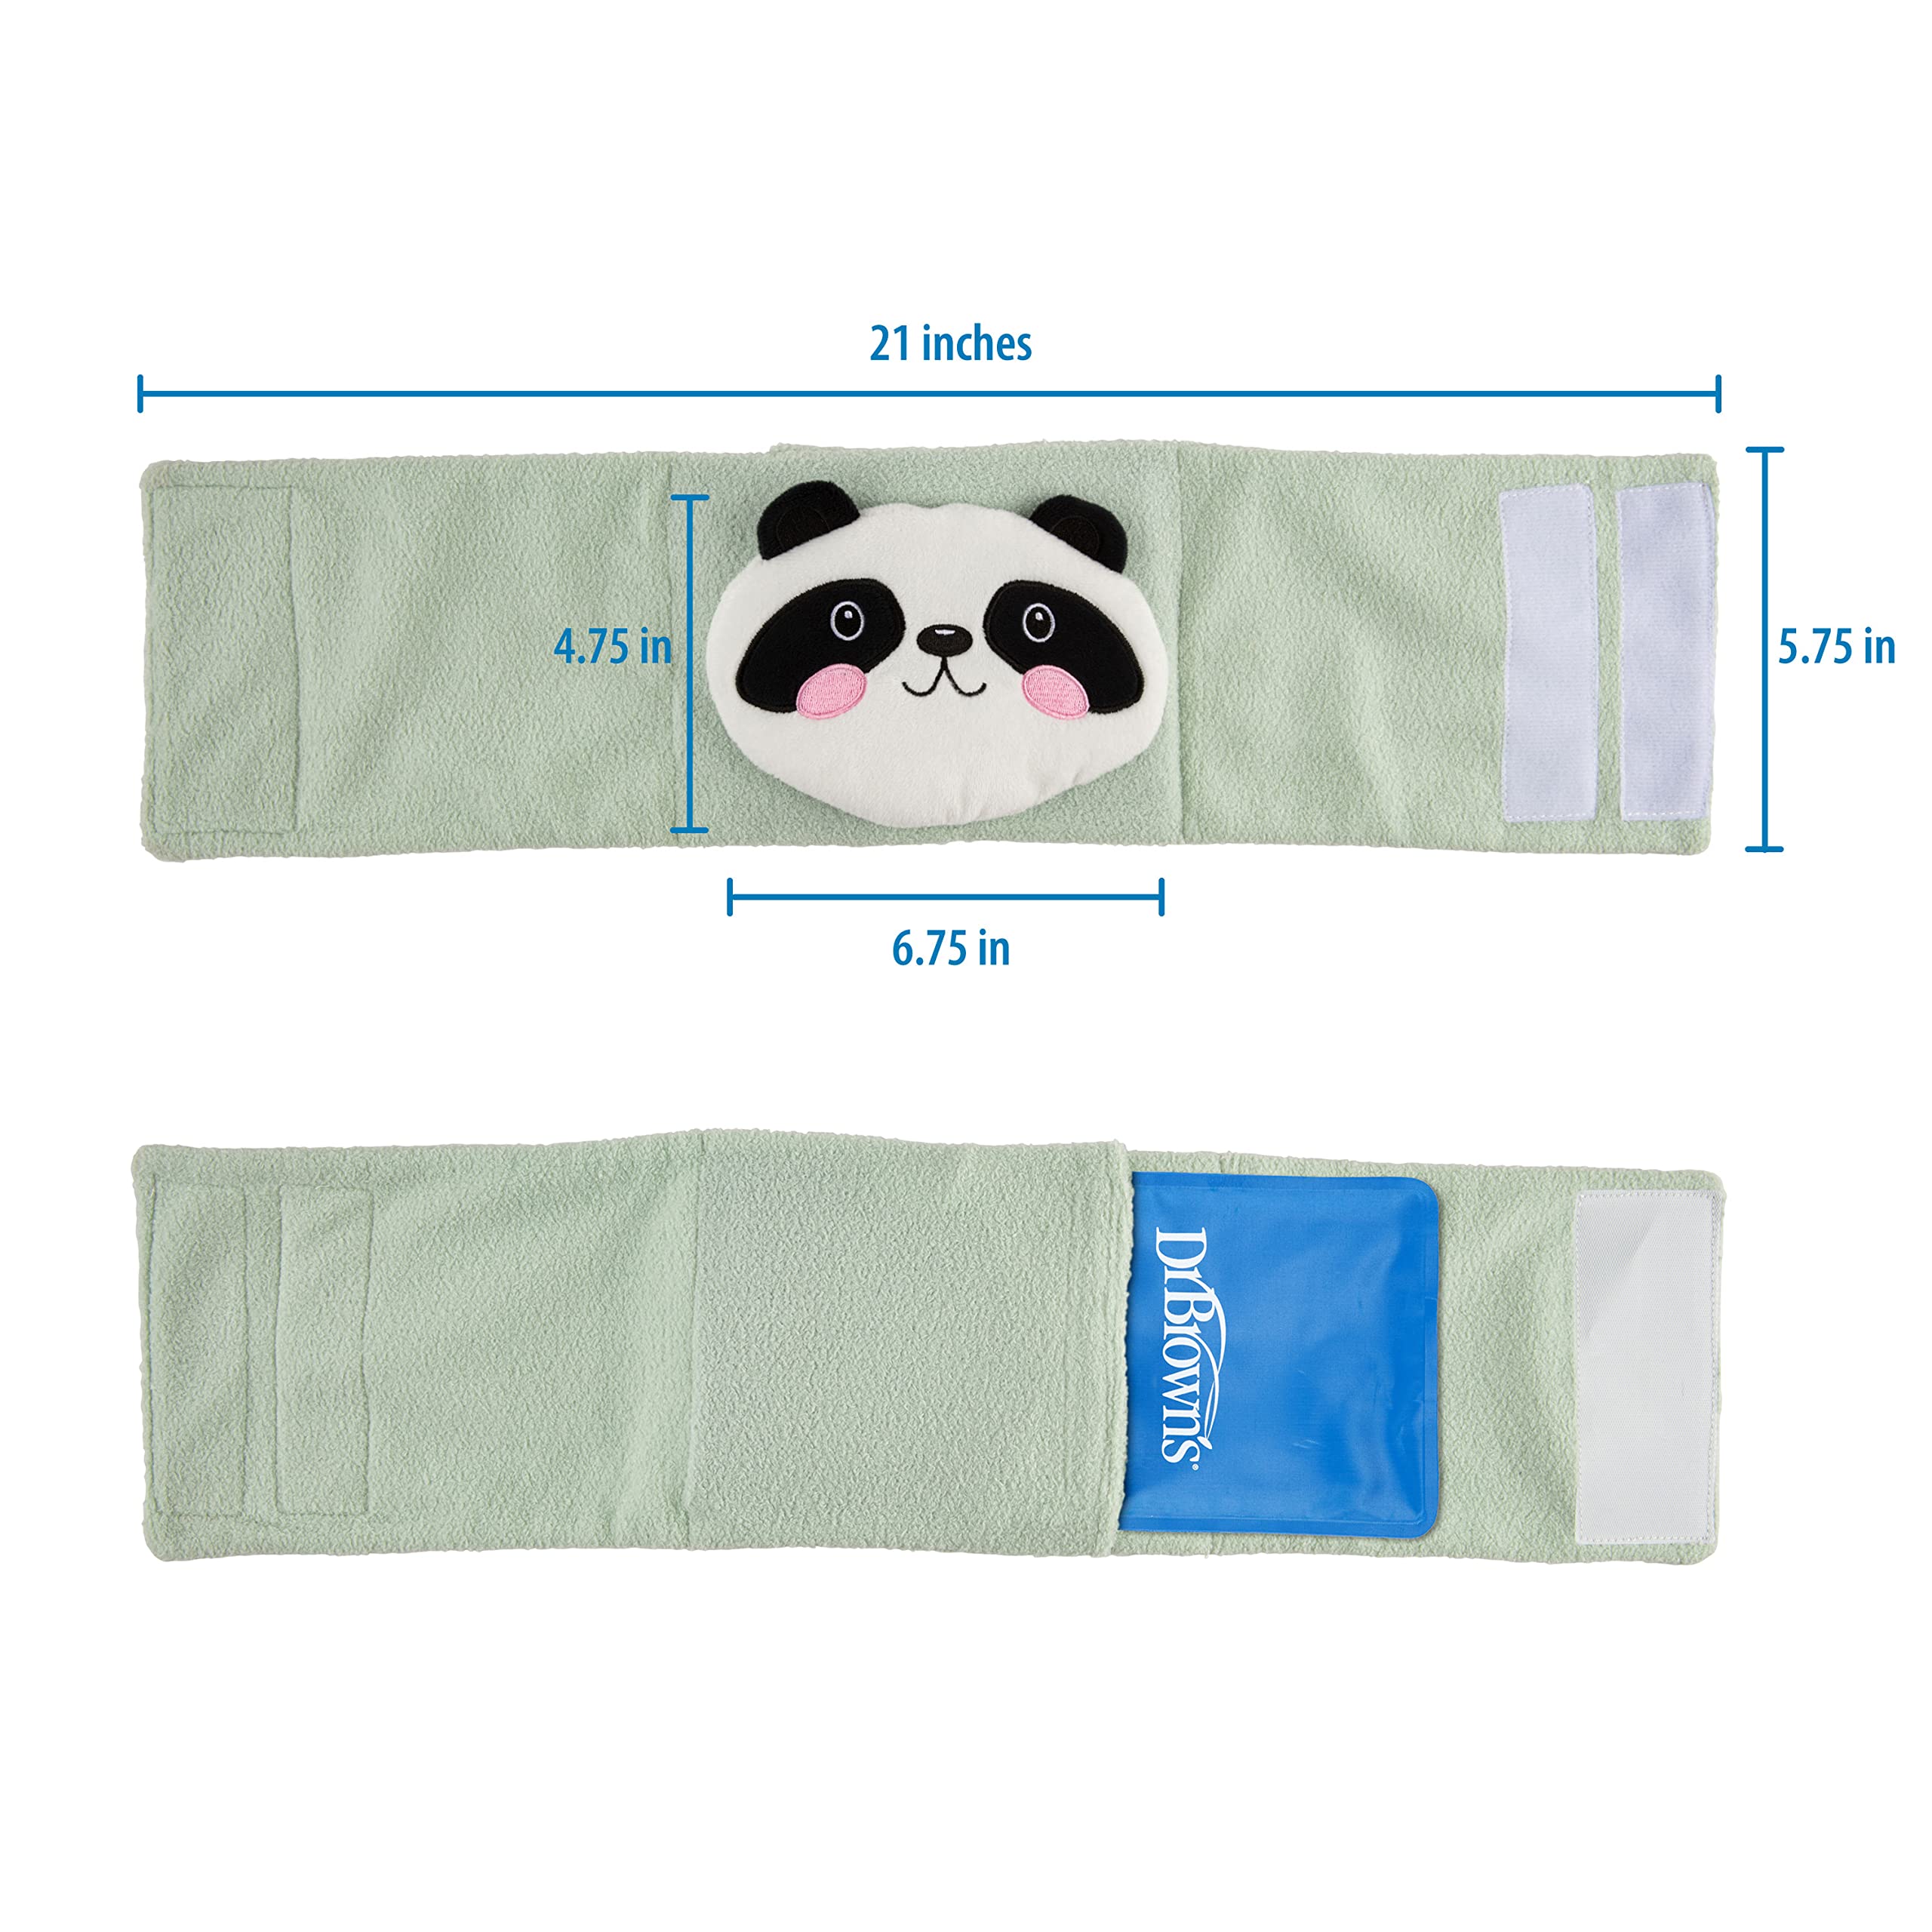 Dr. Brown’s Infant Gripebelt for Colic Relief, Heated Tummy Wrap, Baby Swaddling Belt for Gas Relief, Natural Relief for Upset Stomach in Babies and Toddlers, Panda, 0-3m